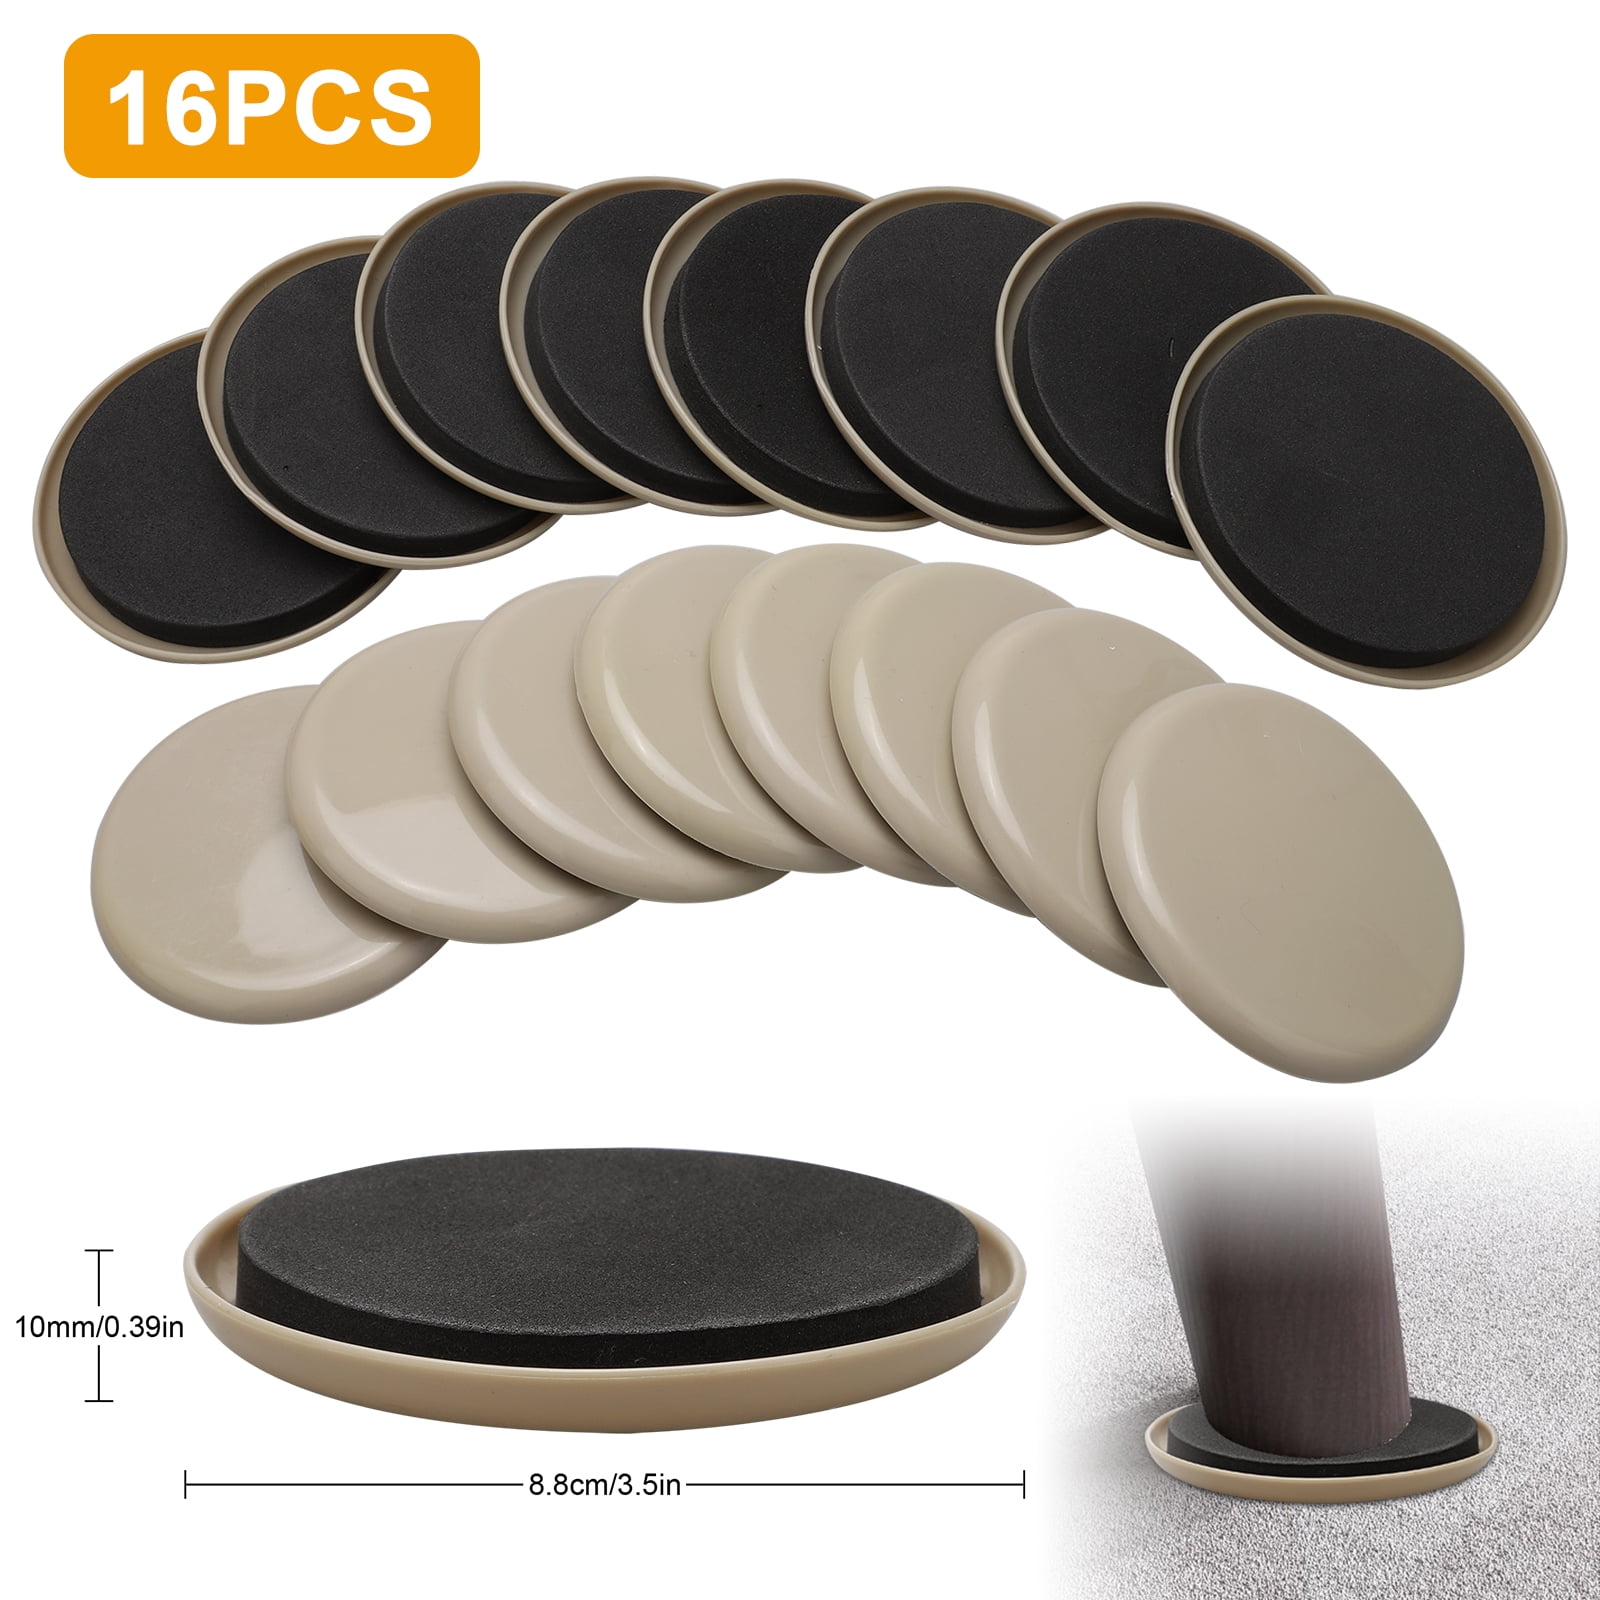 Details about   16X 3.5" Moving Sliders Furniture Pad Protectors Sliders Floor Wood Carpet Move 